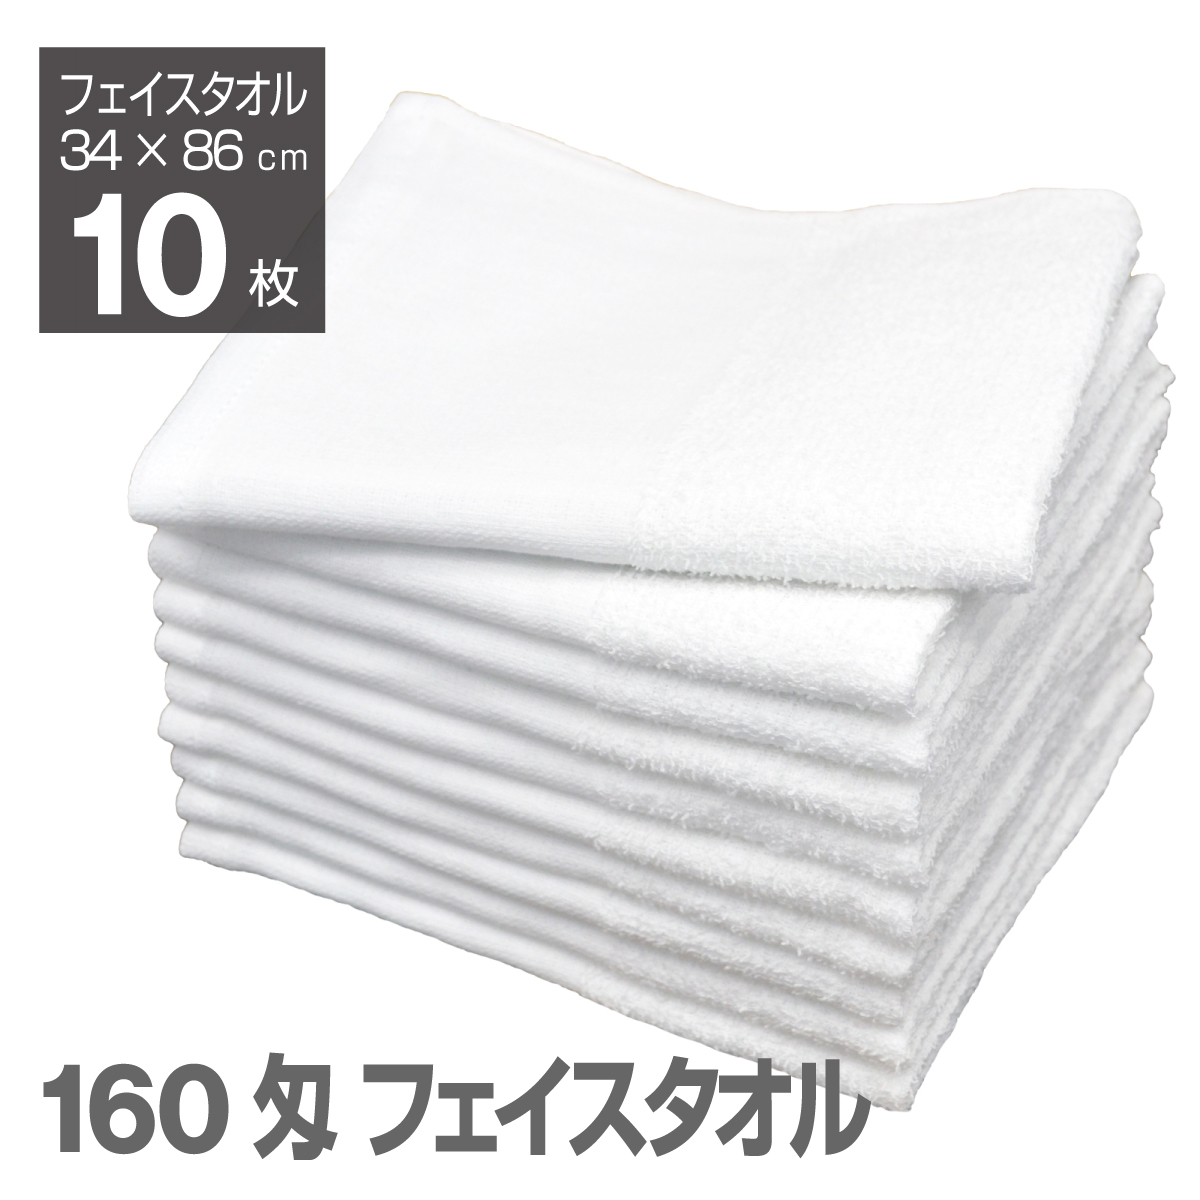  white face towel 10 sheets set flat ground attaching height length . thin hot spring towel . for 160. speed .... early compact storage space-saving Mini ma list 